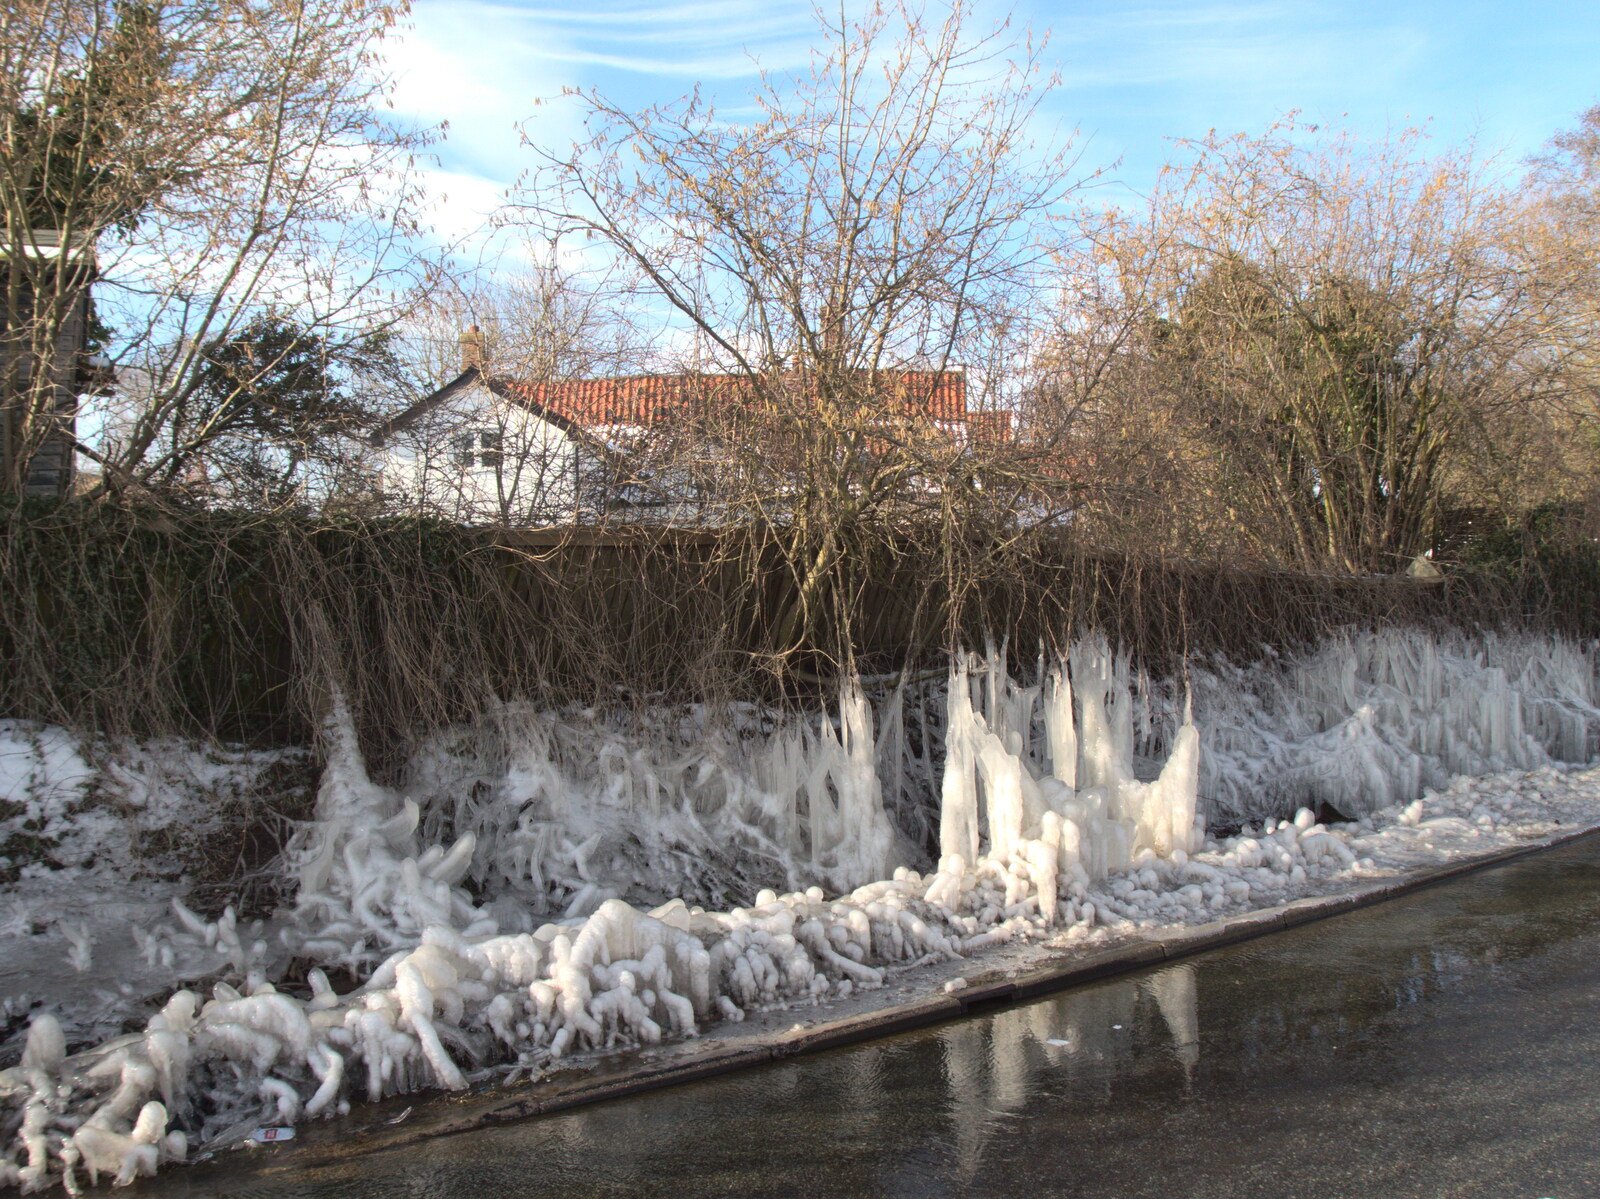 The ice sculpture on Denmark Hill from Derelict Infants School and Ice Sculptures, Diss and Palgrave, Norfolk and Suffolk - 13th February 2021